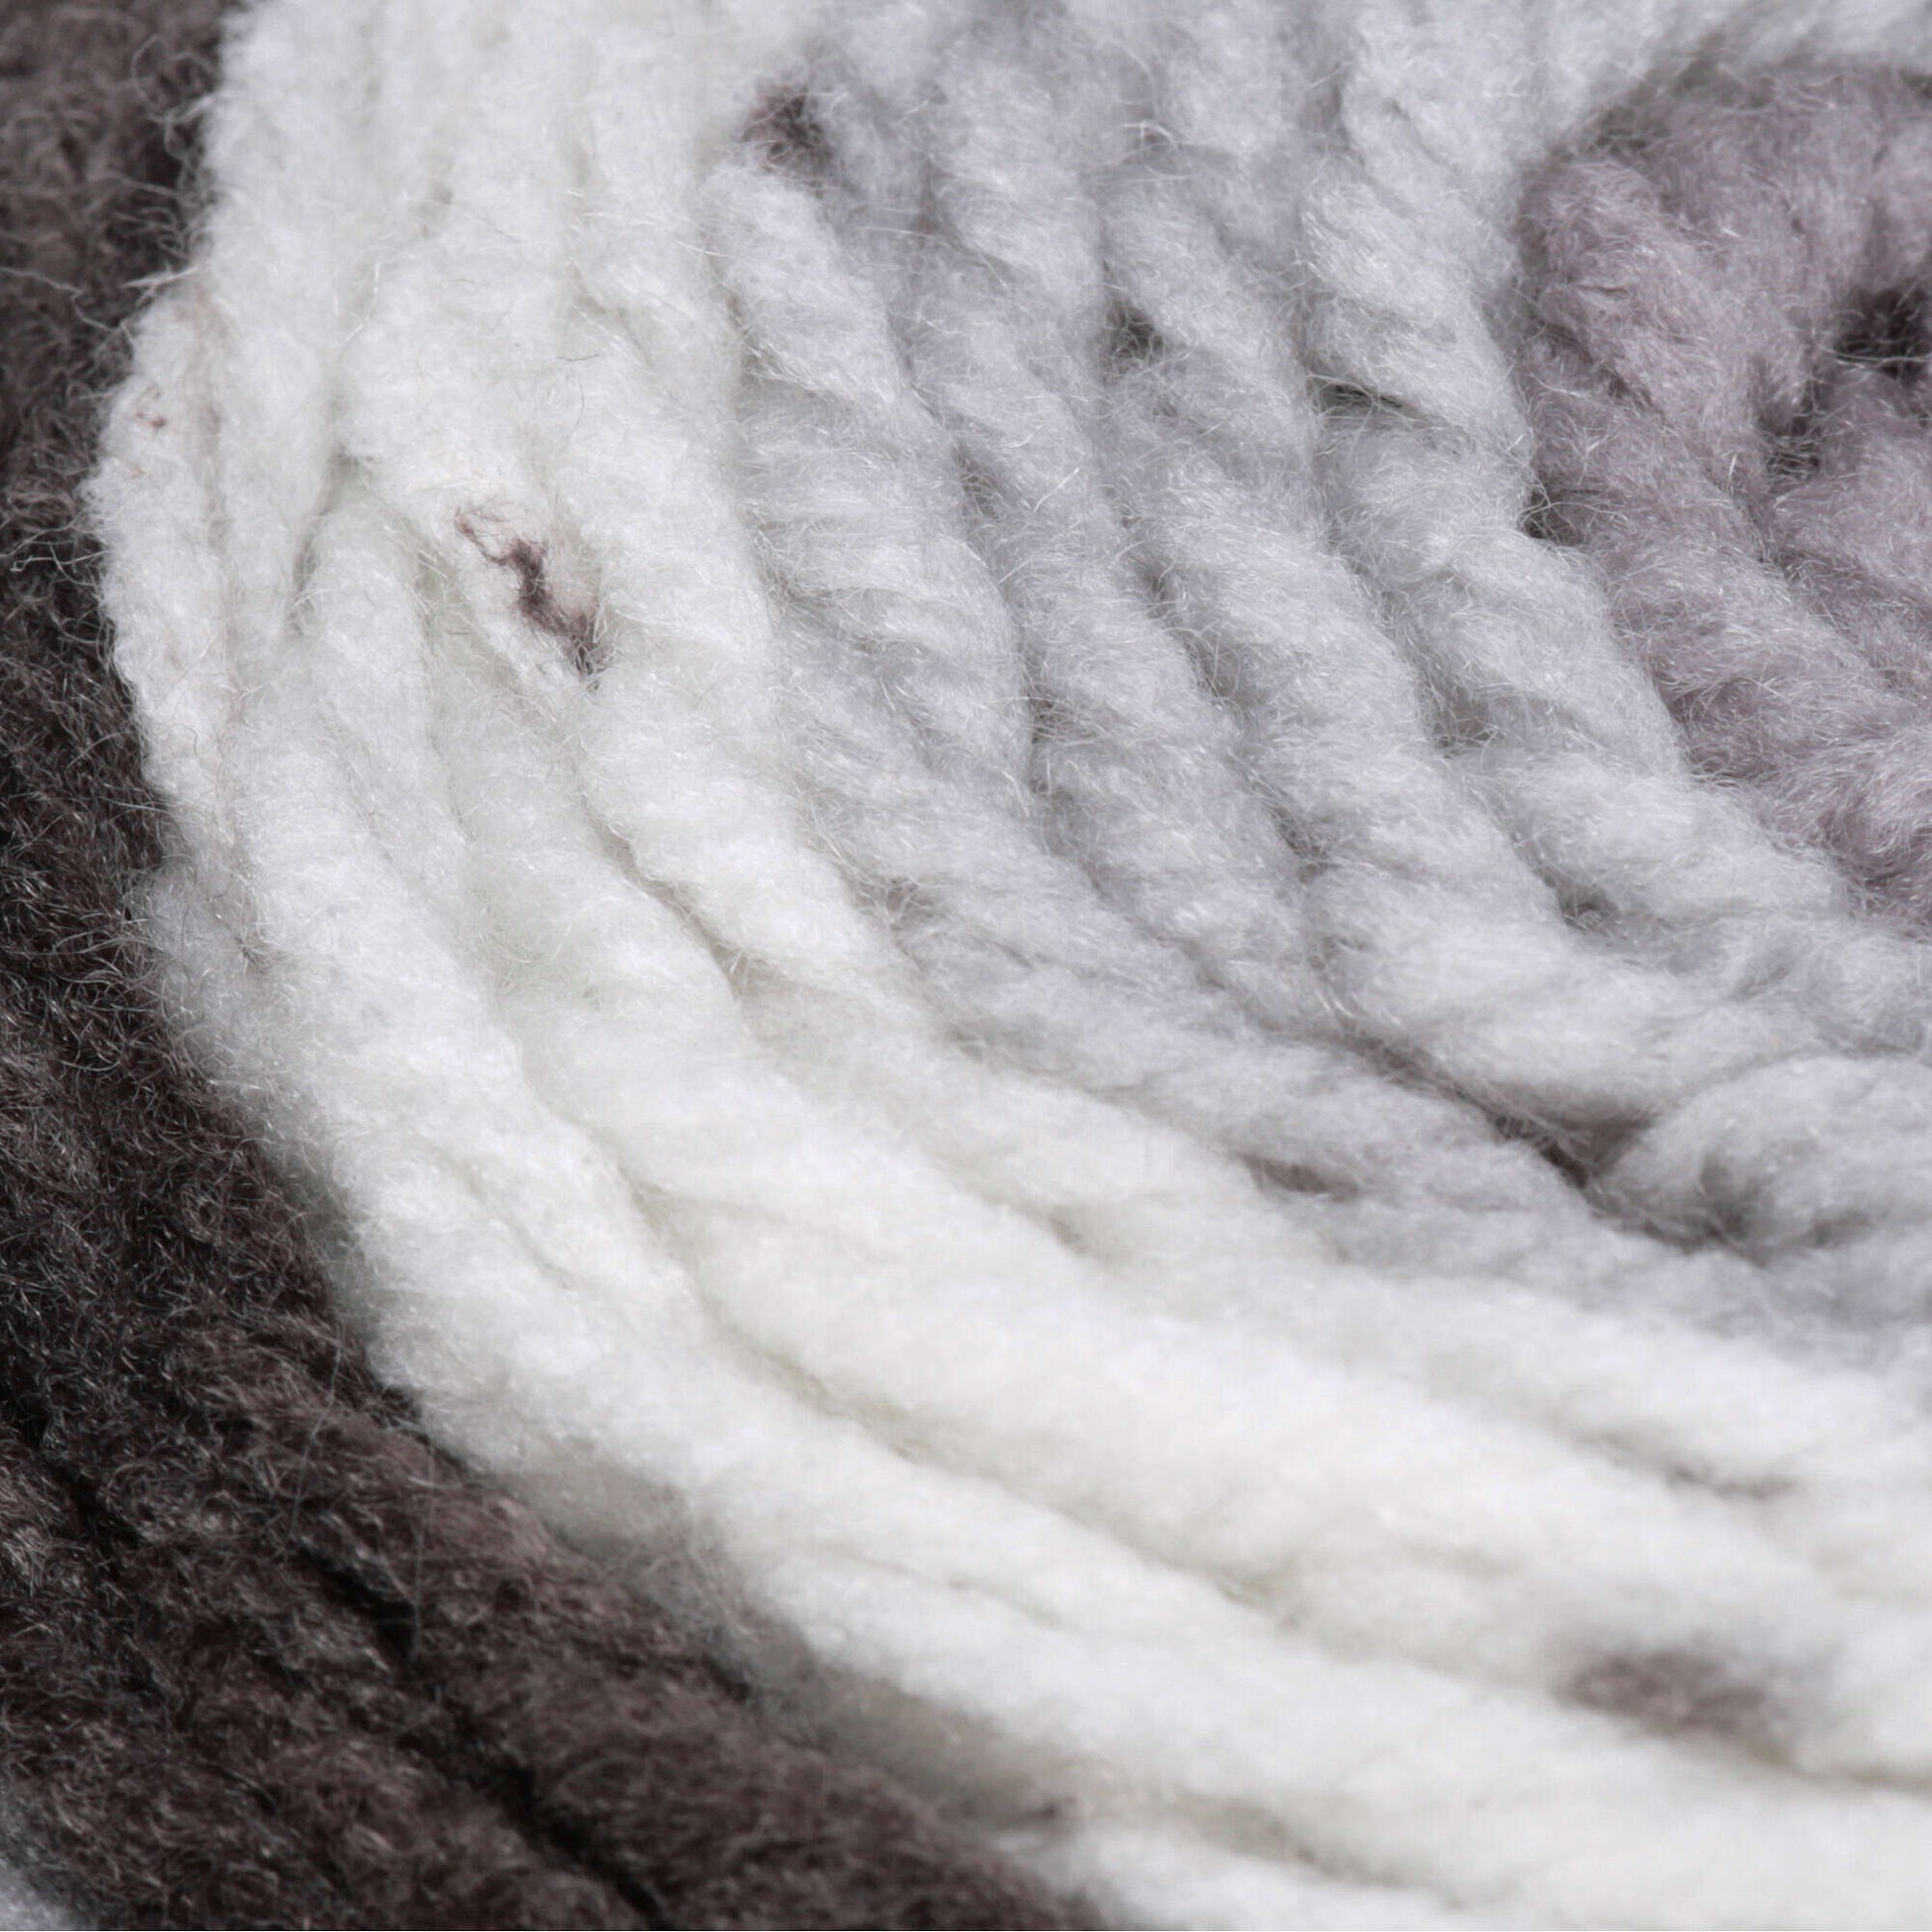 White, pink, ivory wool yarn for crafts